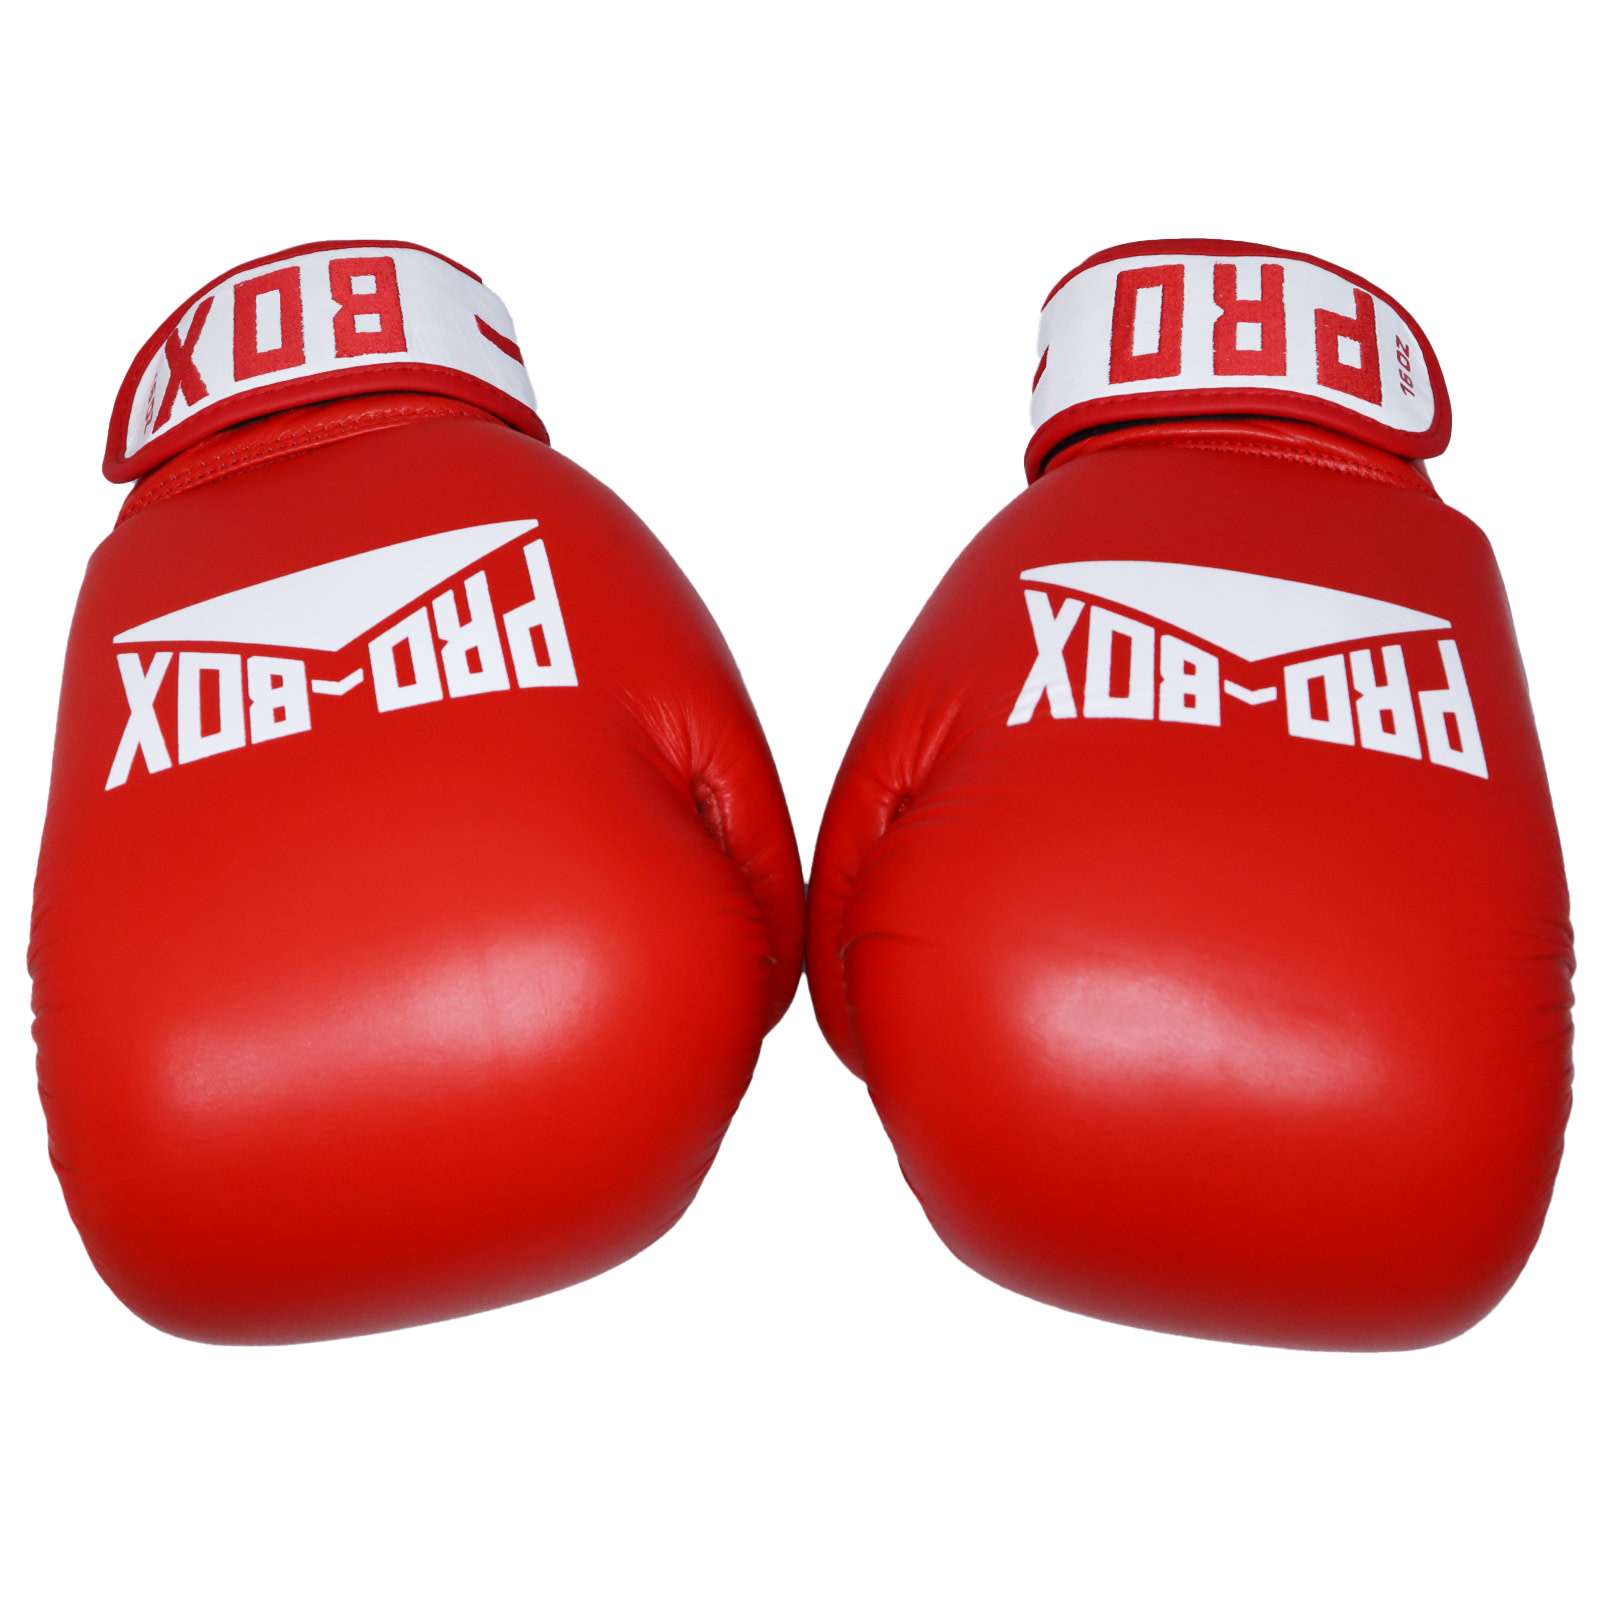 Pro-Box 'Pro Spar' Leather Training Gloves Red